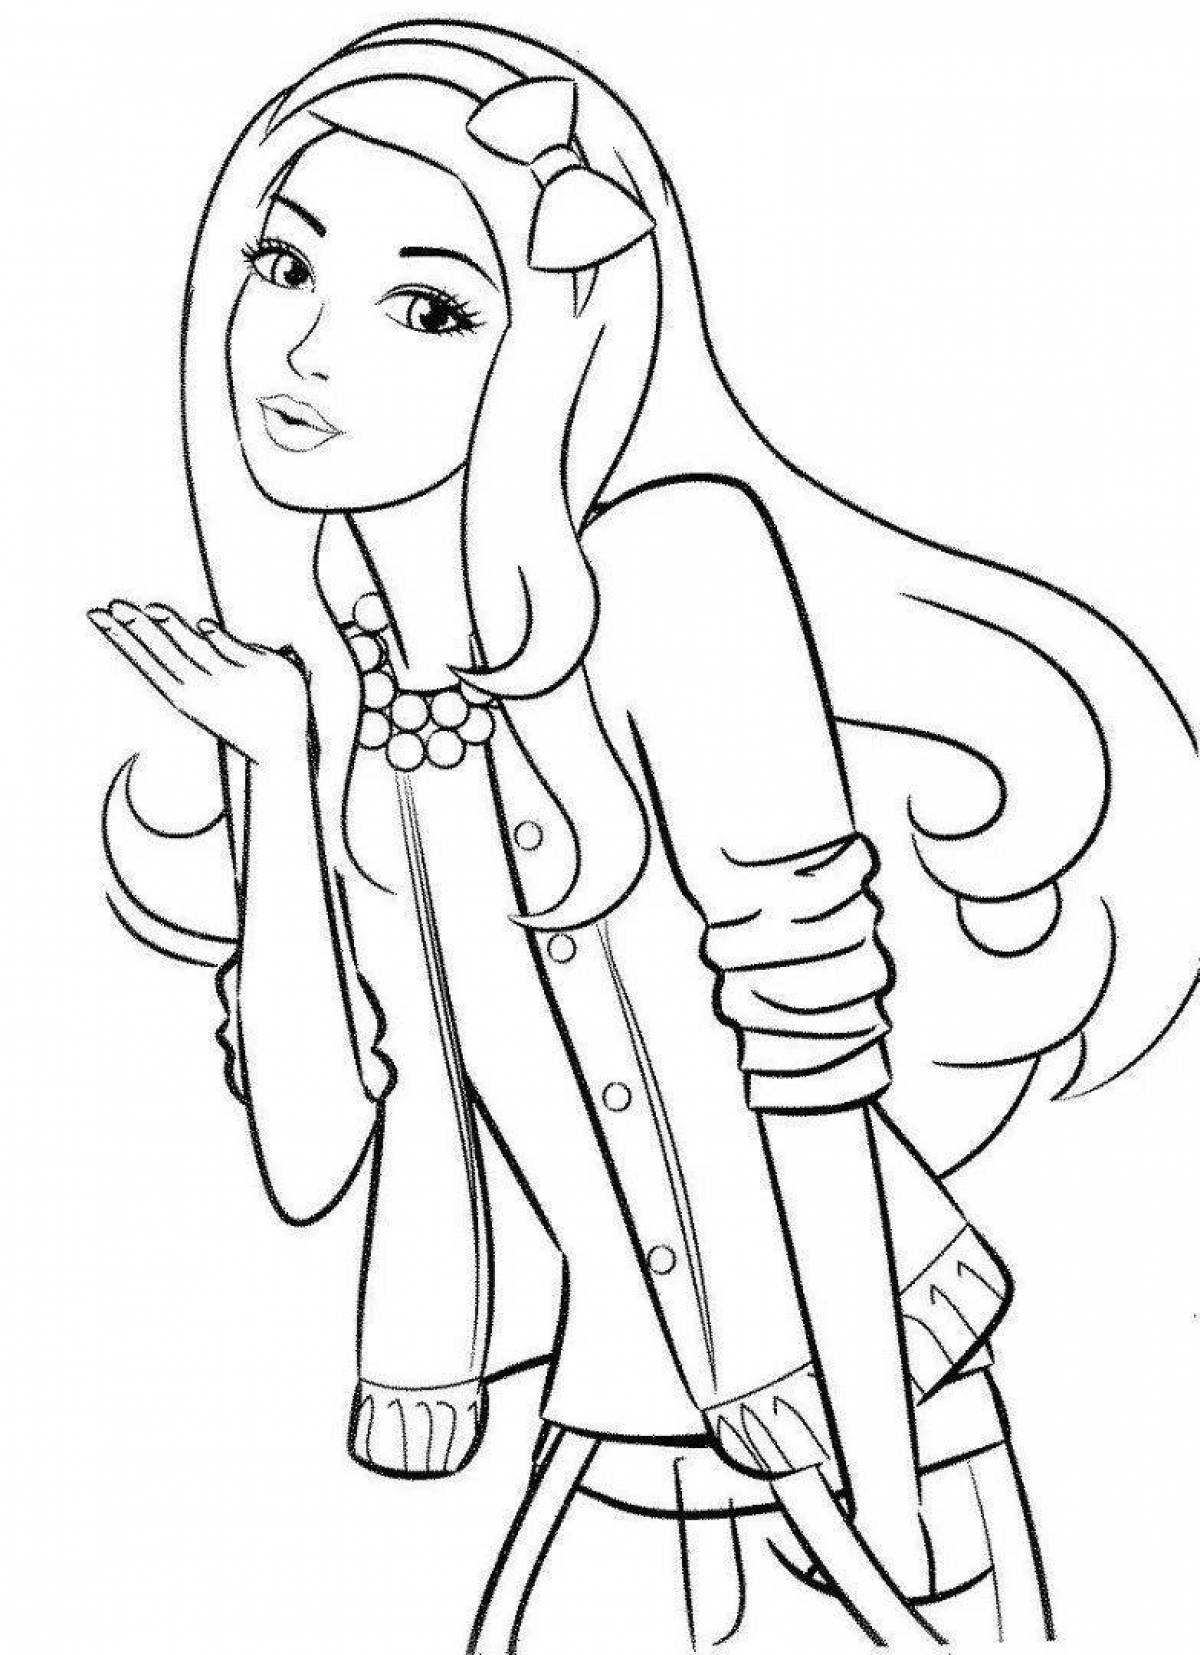 Radiant coloring page fashionista doll